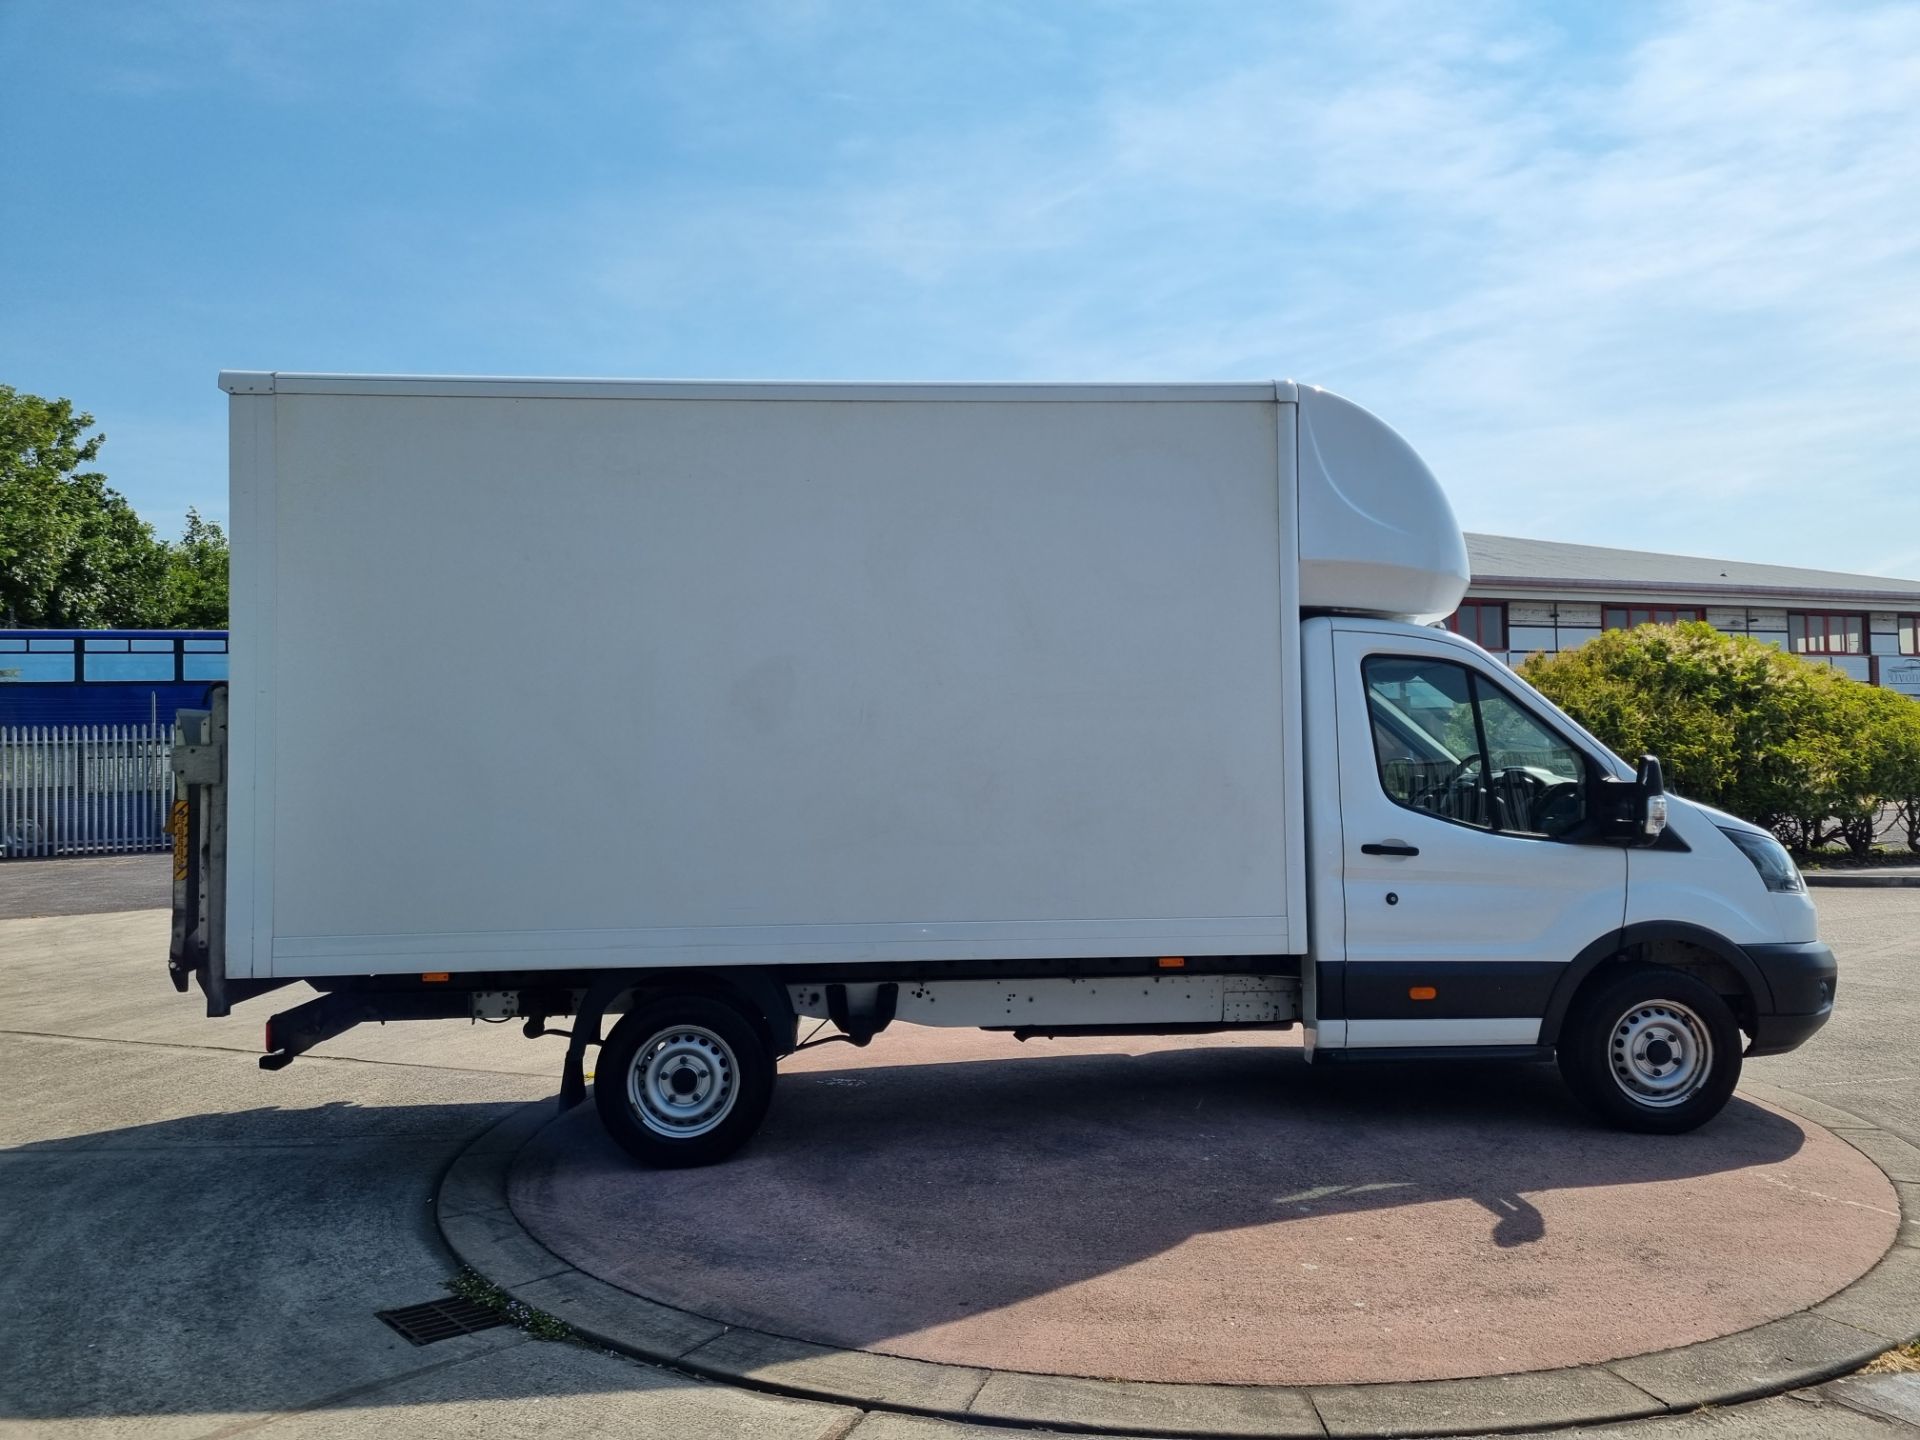 2018 Transit Luton with tail lift - Image 7 of 13